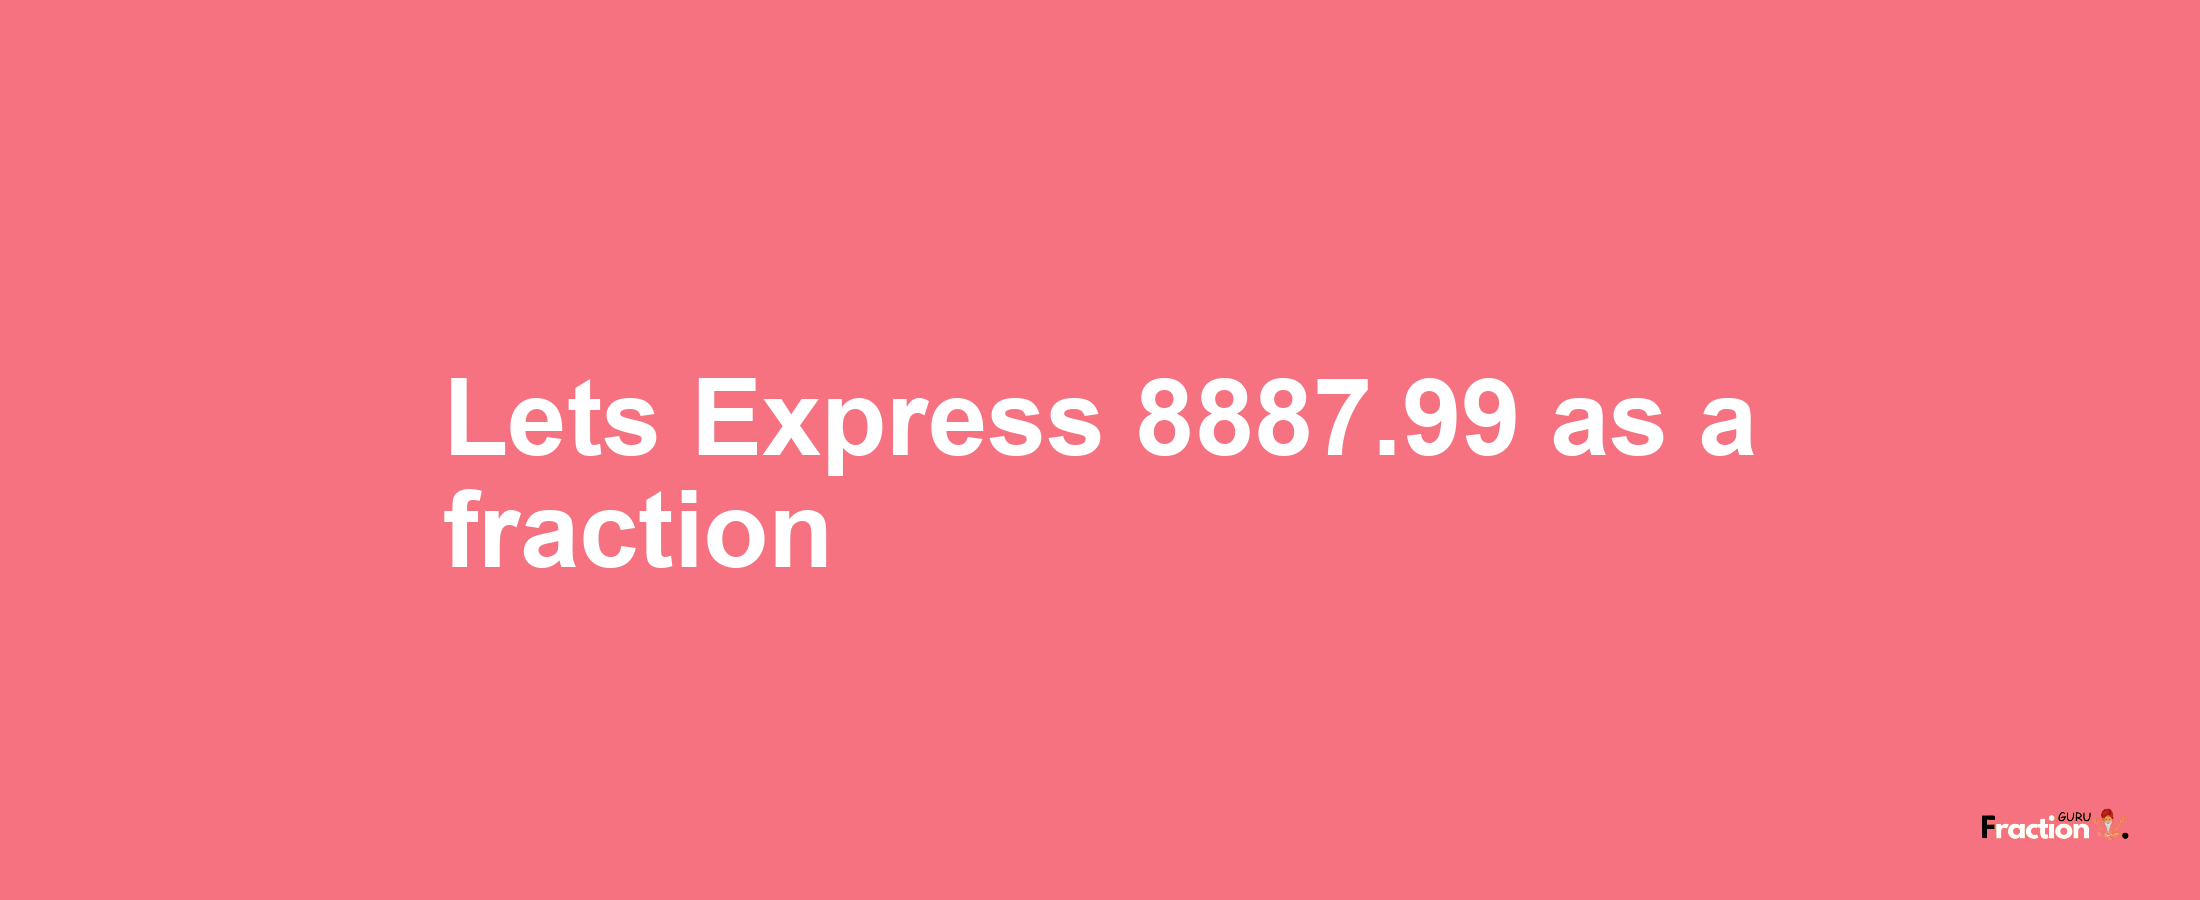 Lets Express 8887.99 as afraction